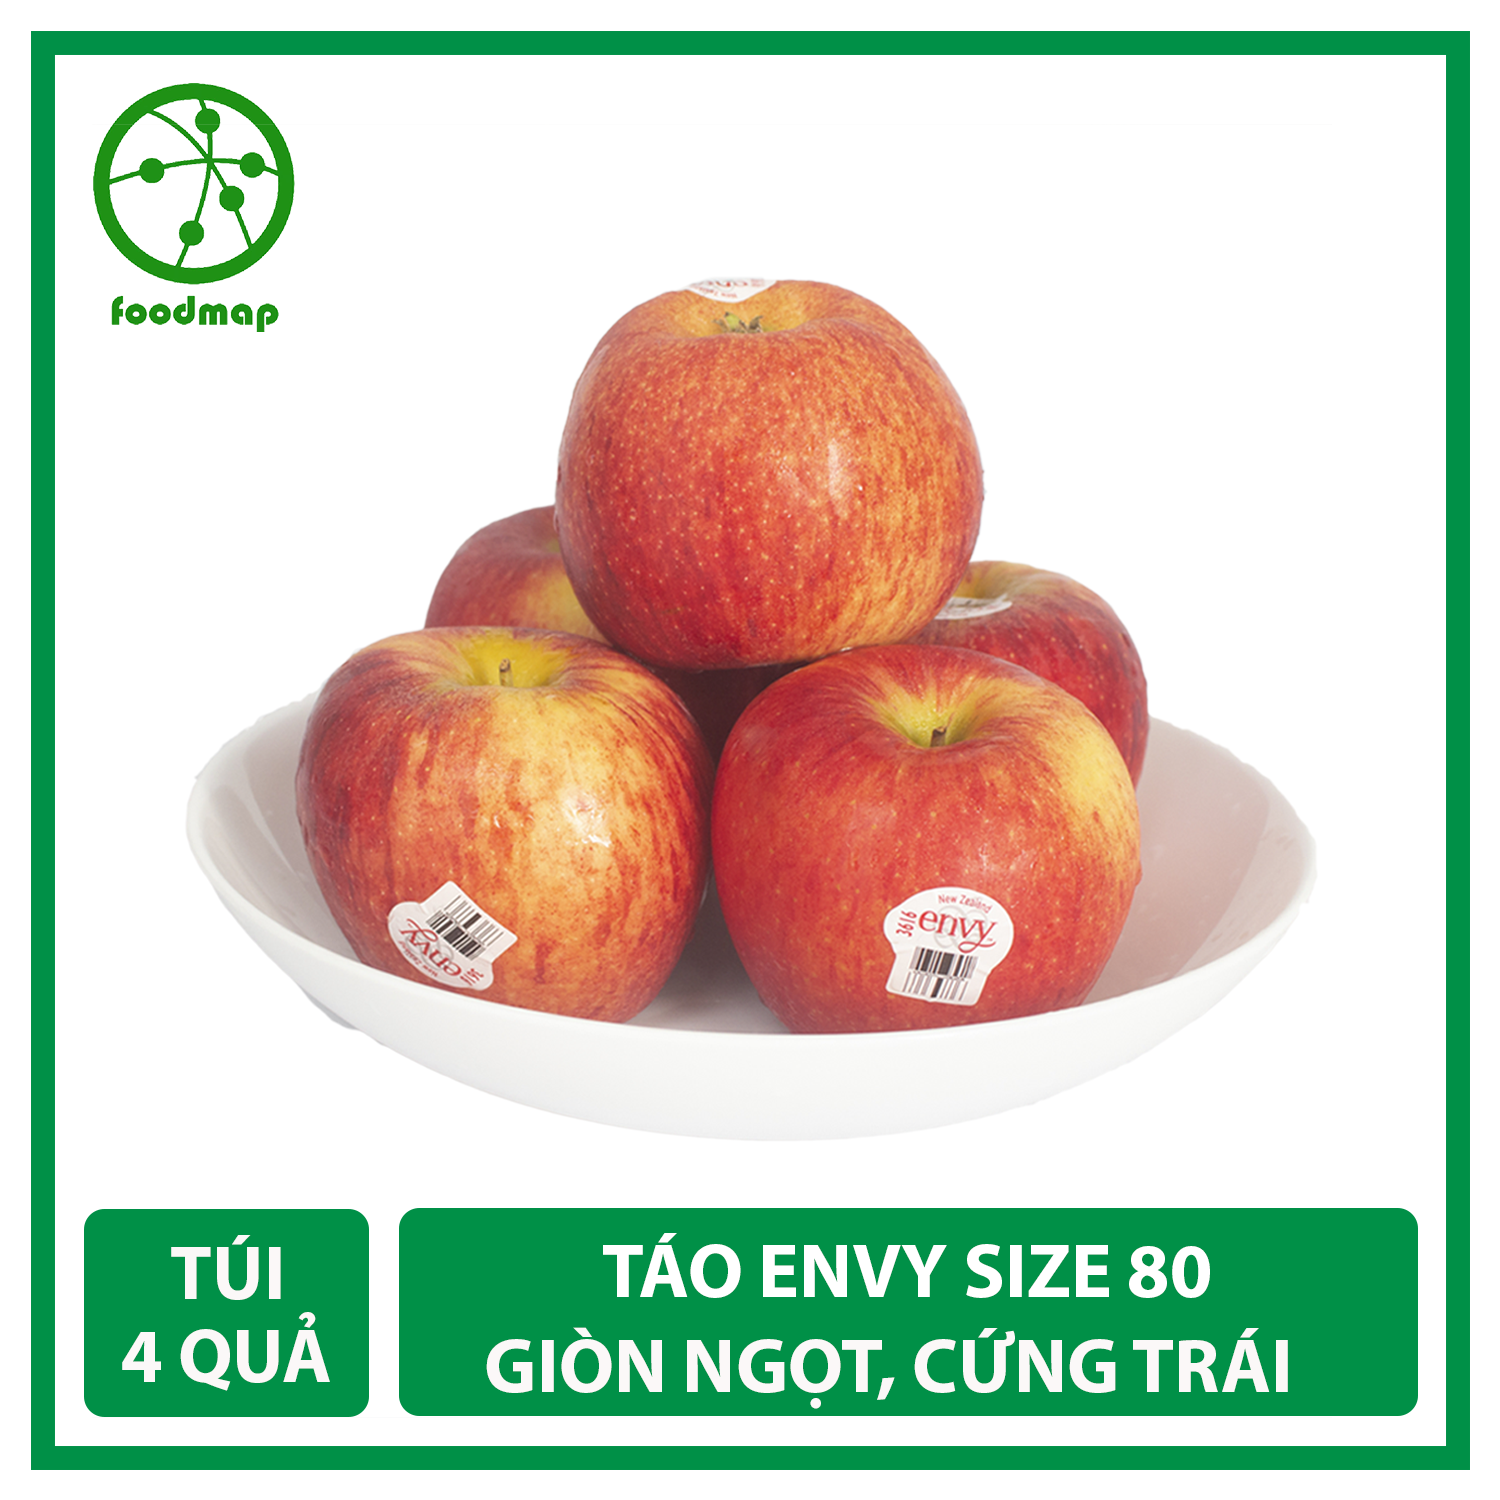 Táo Envy New Zealand Cứng, Giòn, Ngọt Size 100-110 - Foodmap